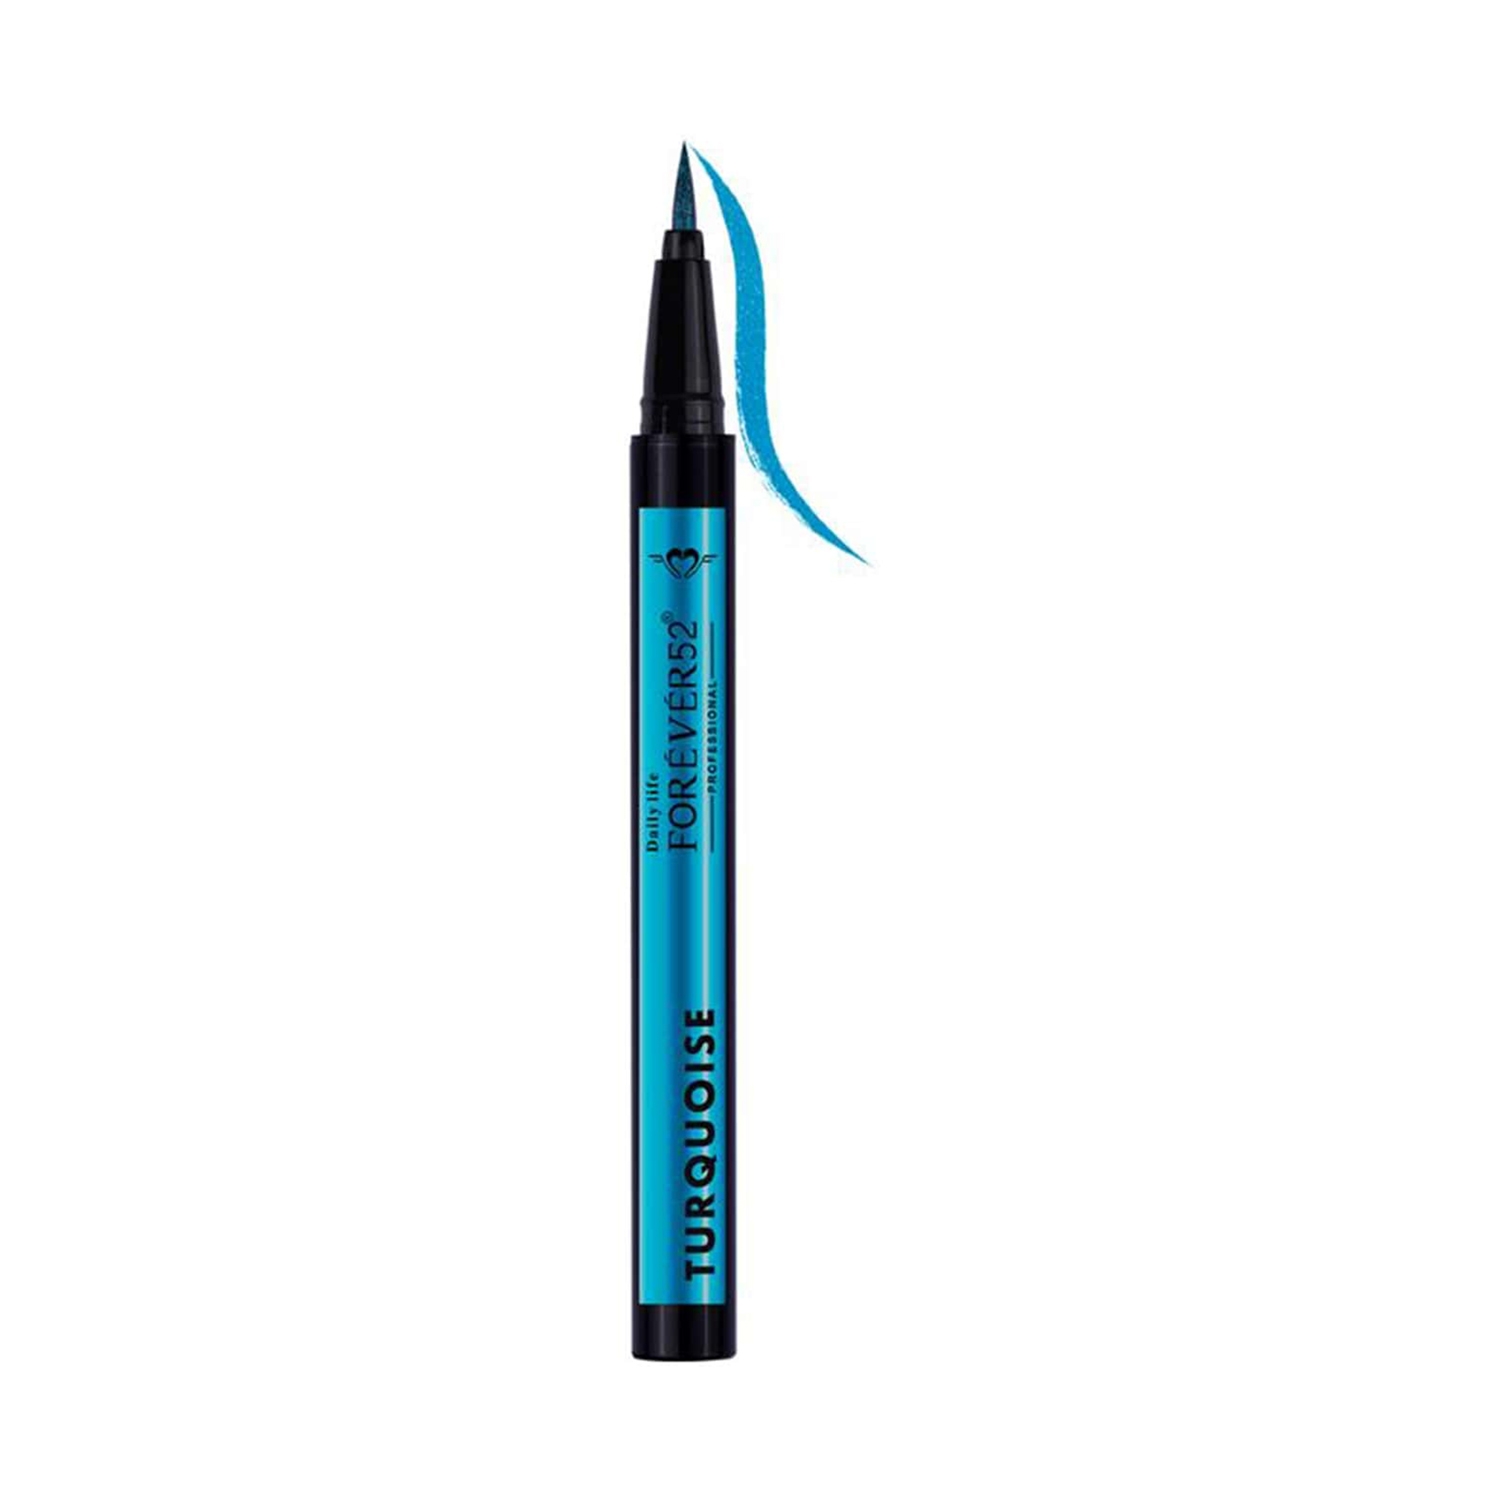 Daily Life Forever52 | Daily Life Forever52 Glitz Waterproof Eyeliner Eyeshadow - Turquoise (0.6g)